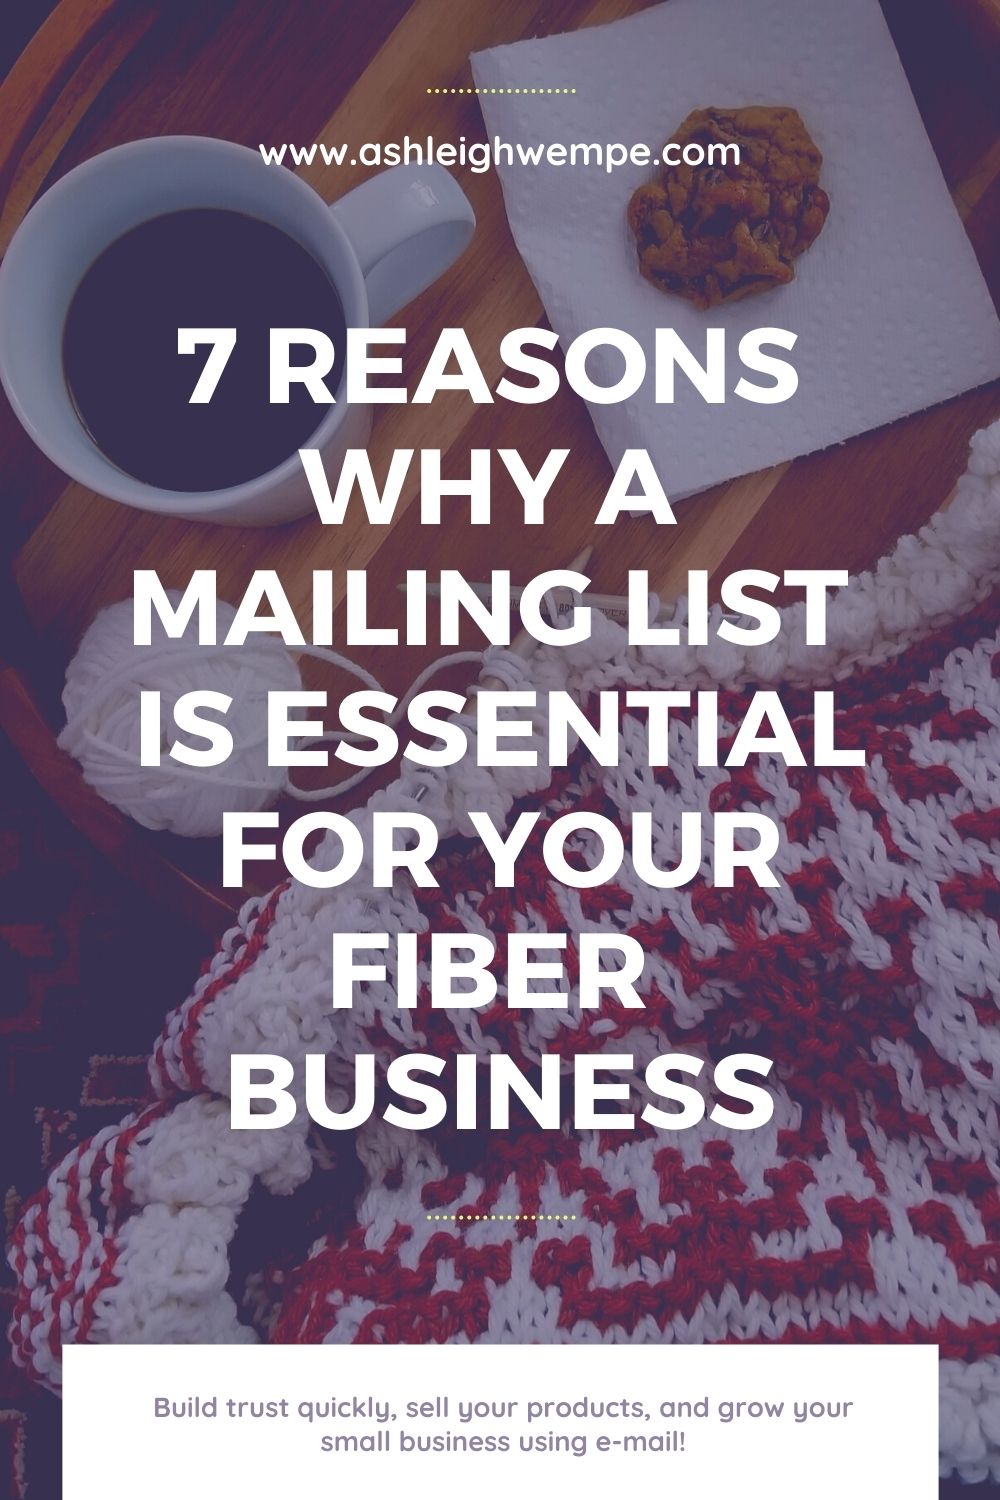 Do you really need a mailing list for your fiber business?